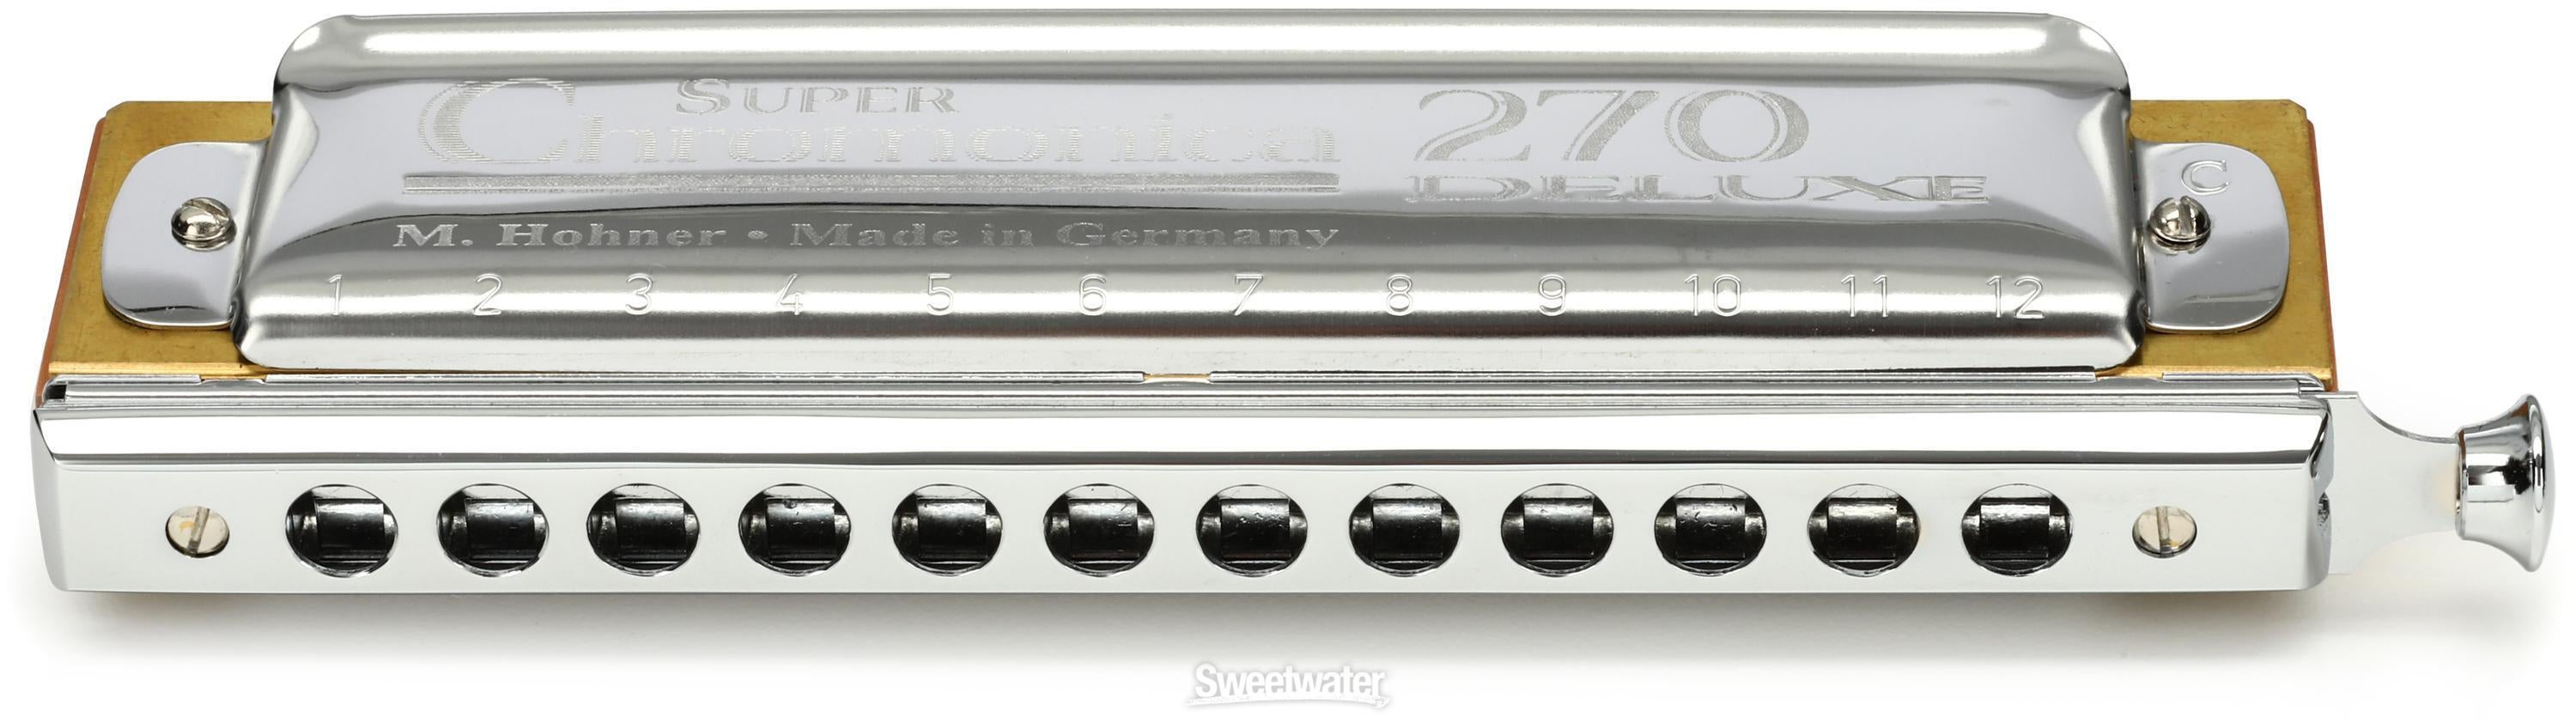 Hohner Super Chromonica 270 Deluxe - Key of C Reviews | Sweetwater